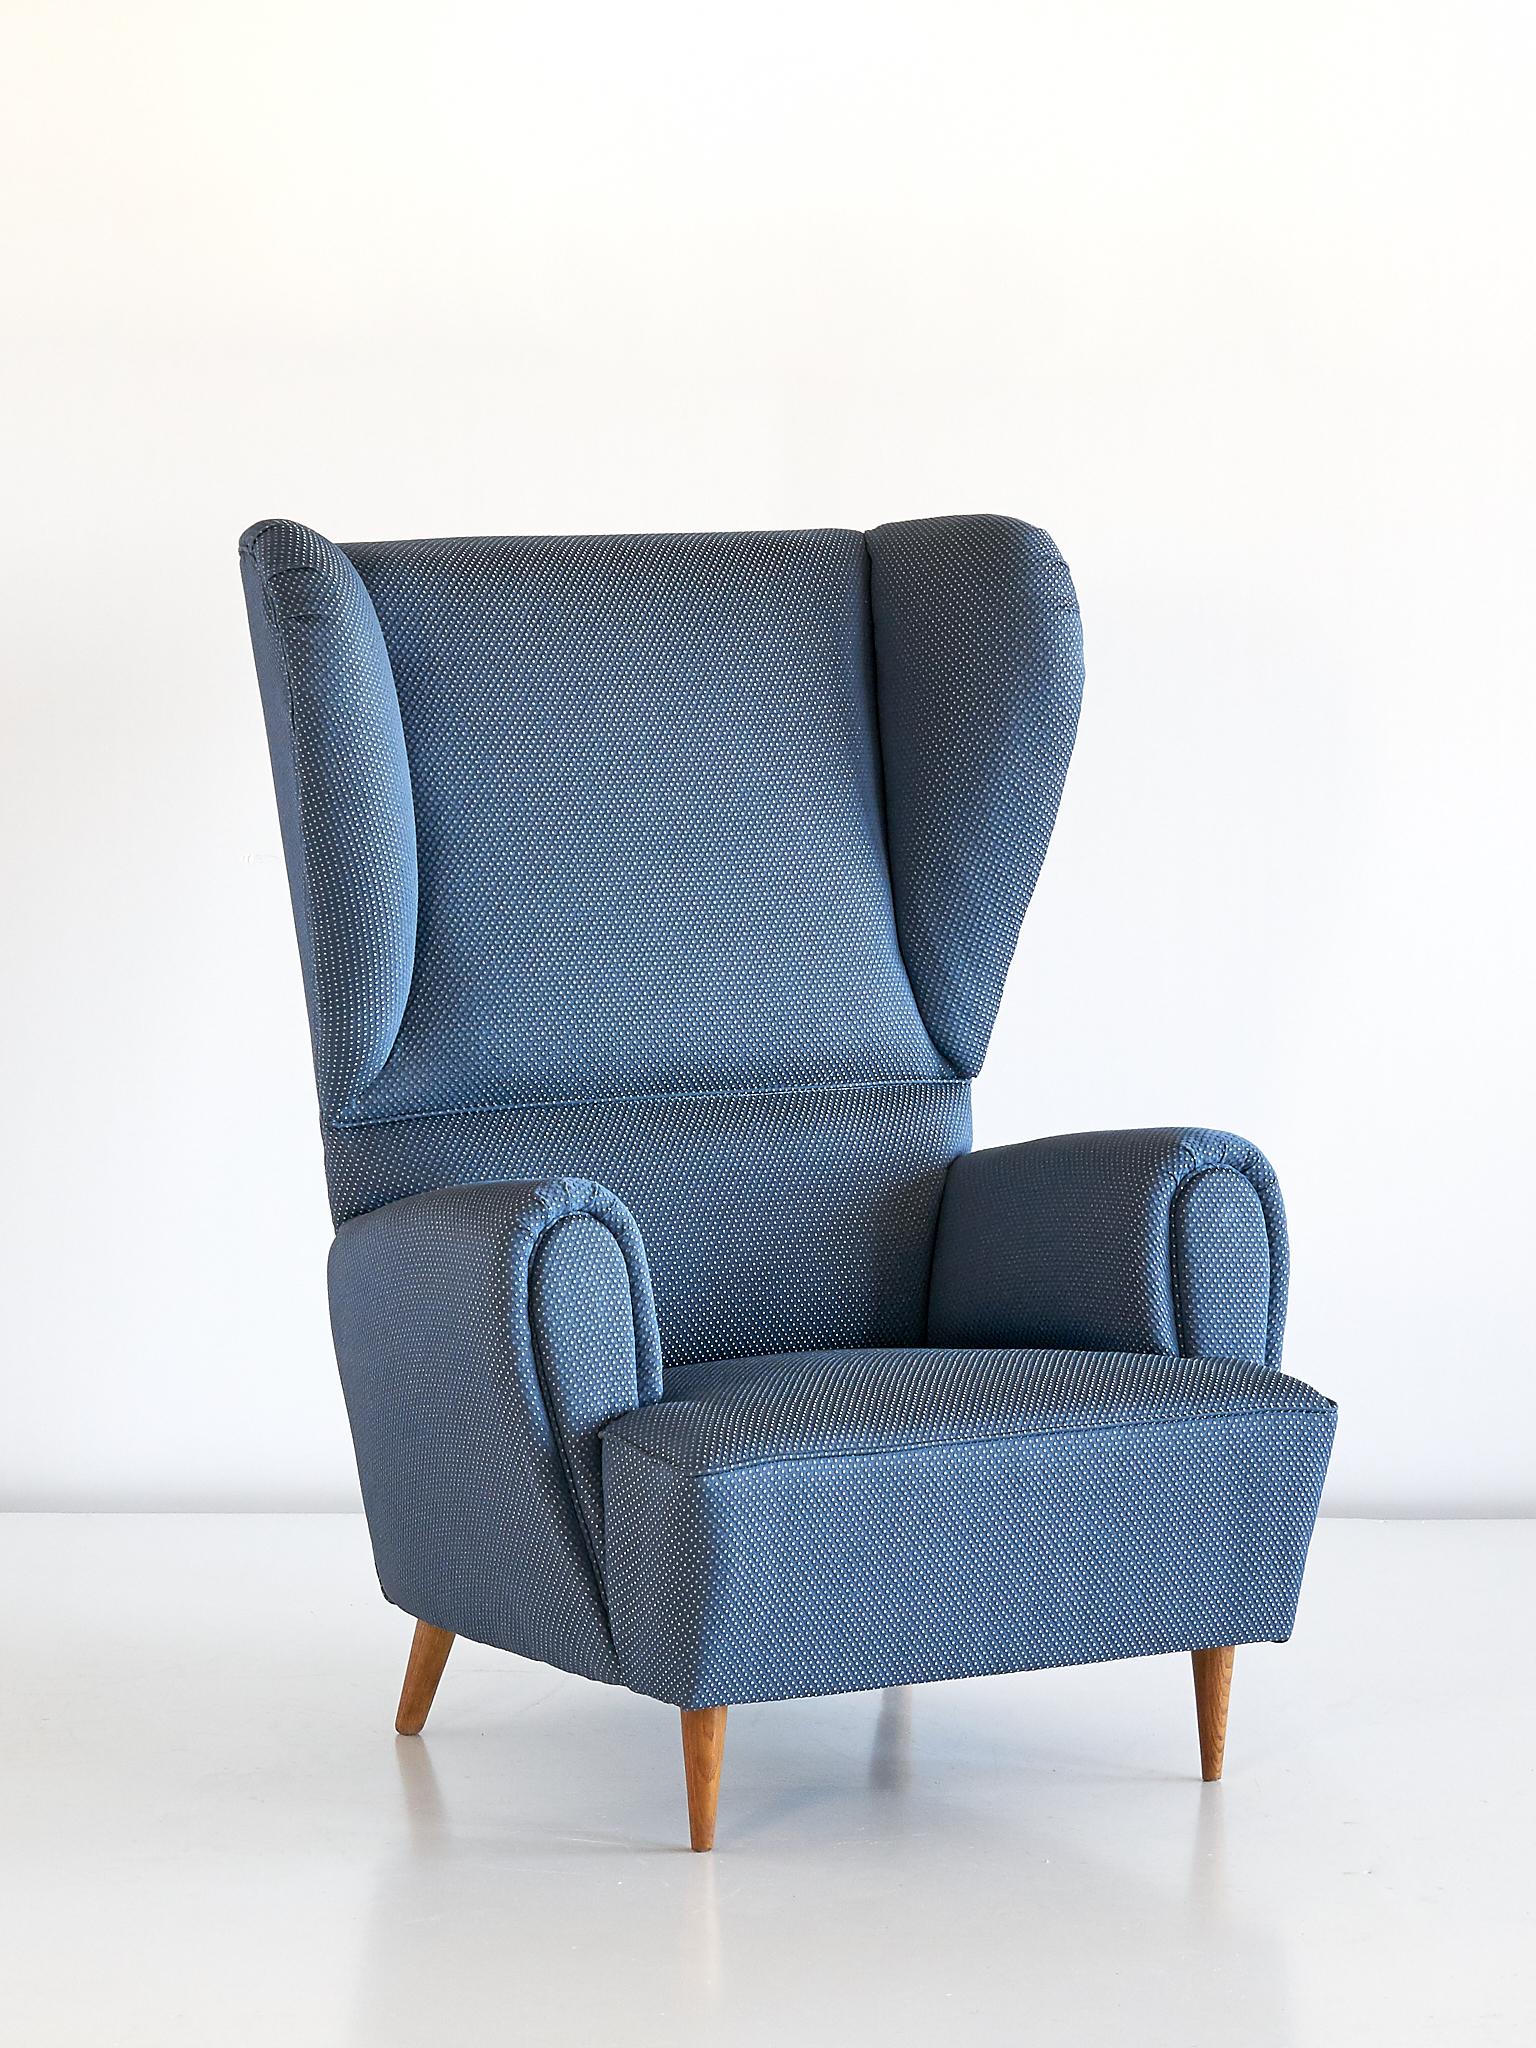 Mid-Century Modern Paolo Buffa High Wingback Chair Upholstered in Blue Rubelli Fabric, Italy, 1940s